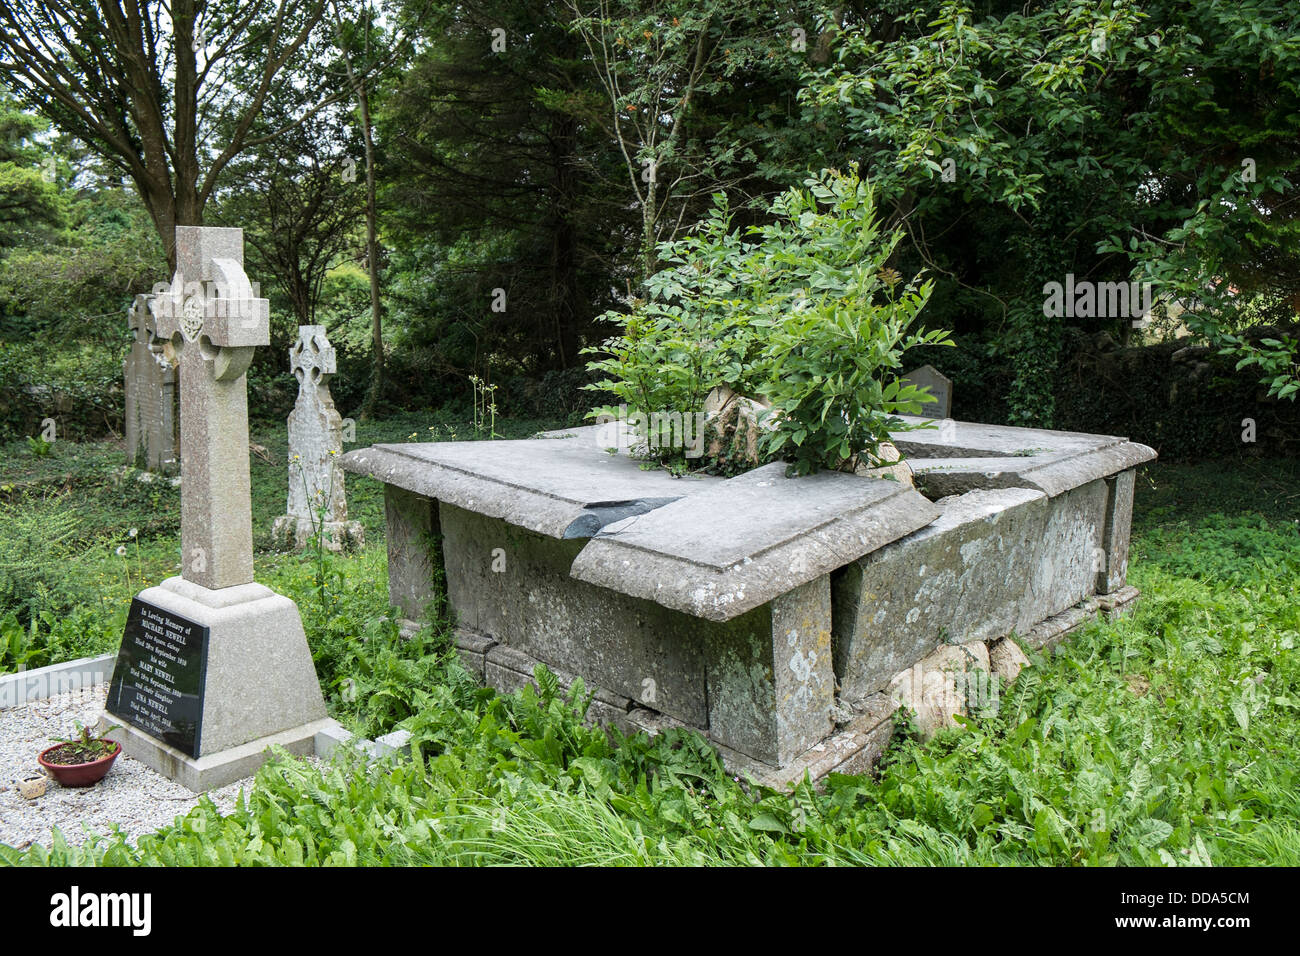 A broken tomb with a tree growing in it at a rural cemetery  - Annaghdown, county Galway Ireland Stock Photo